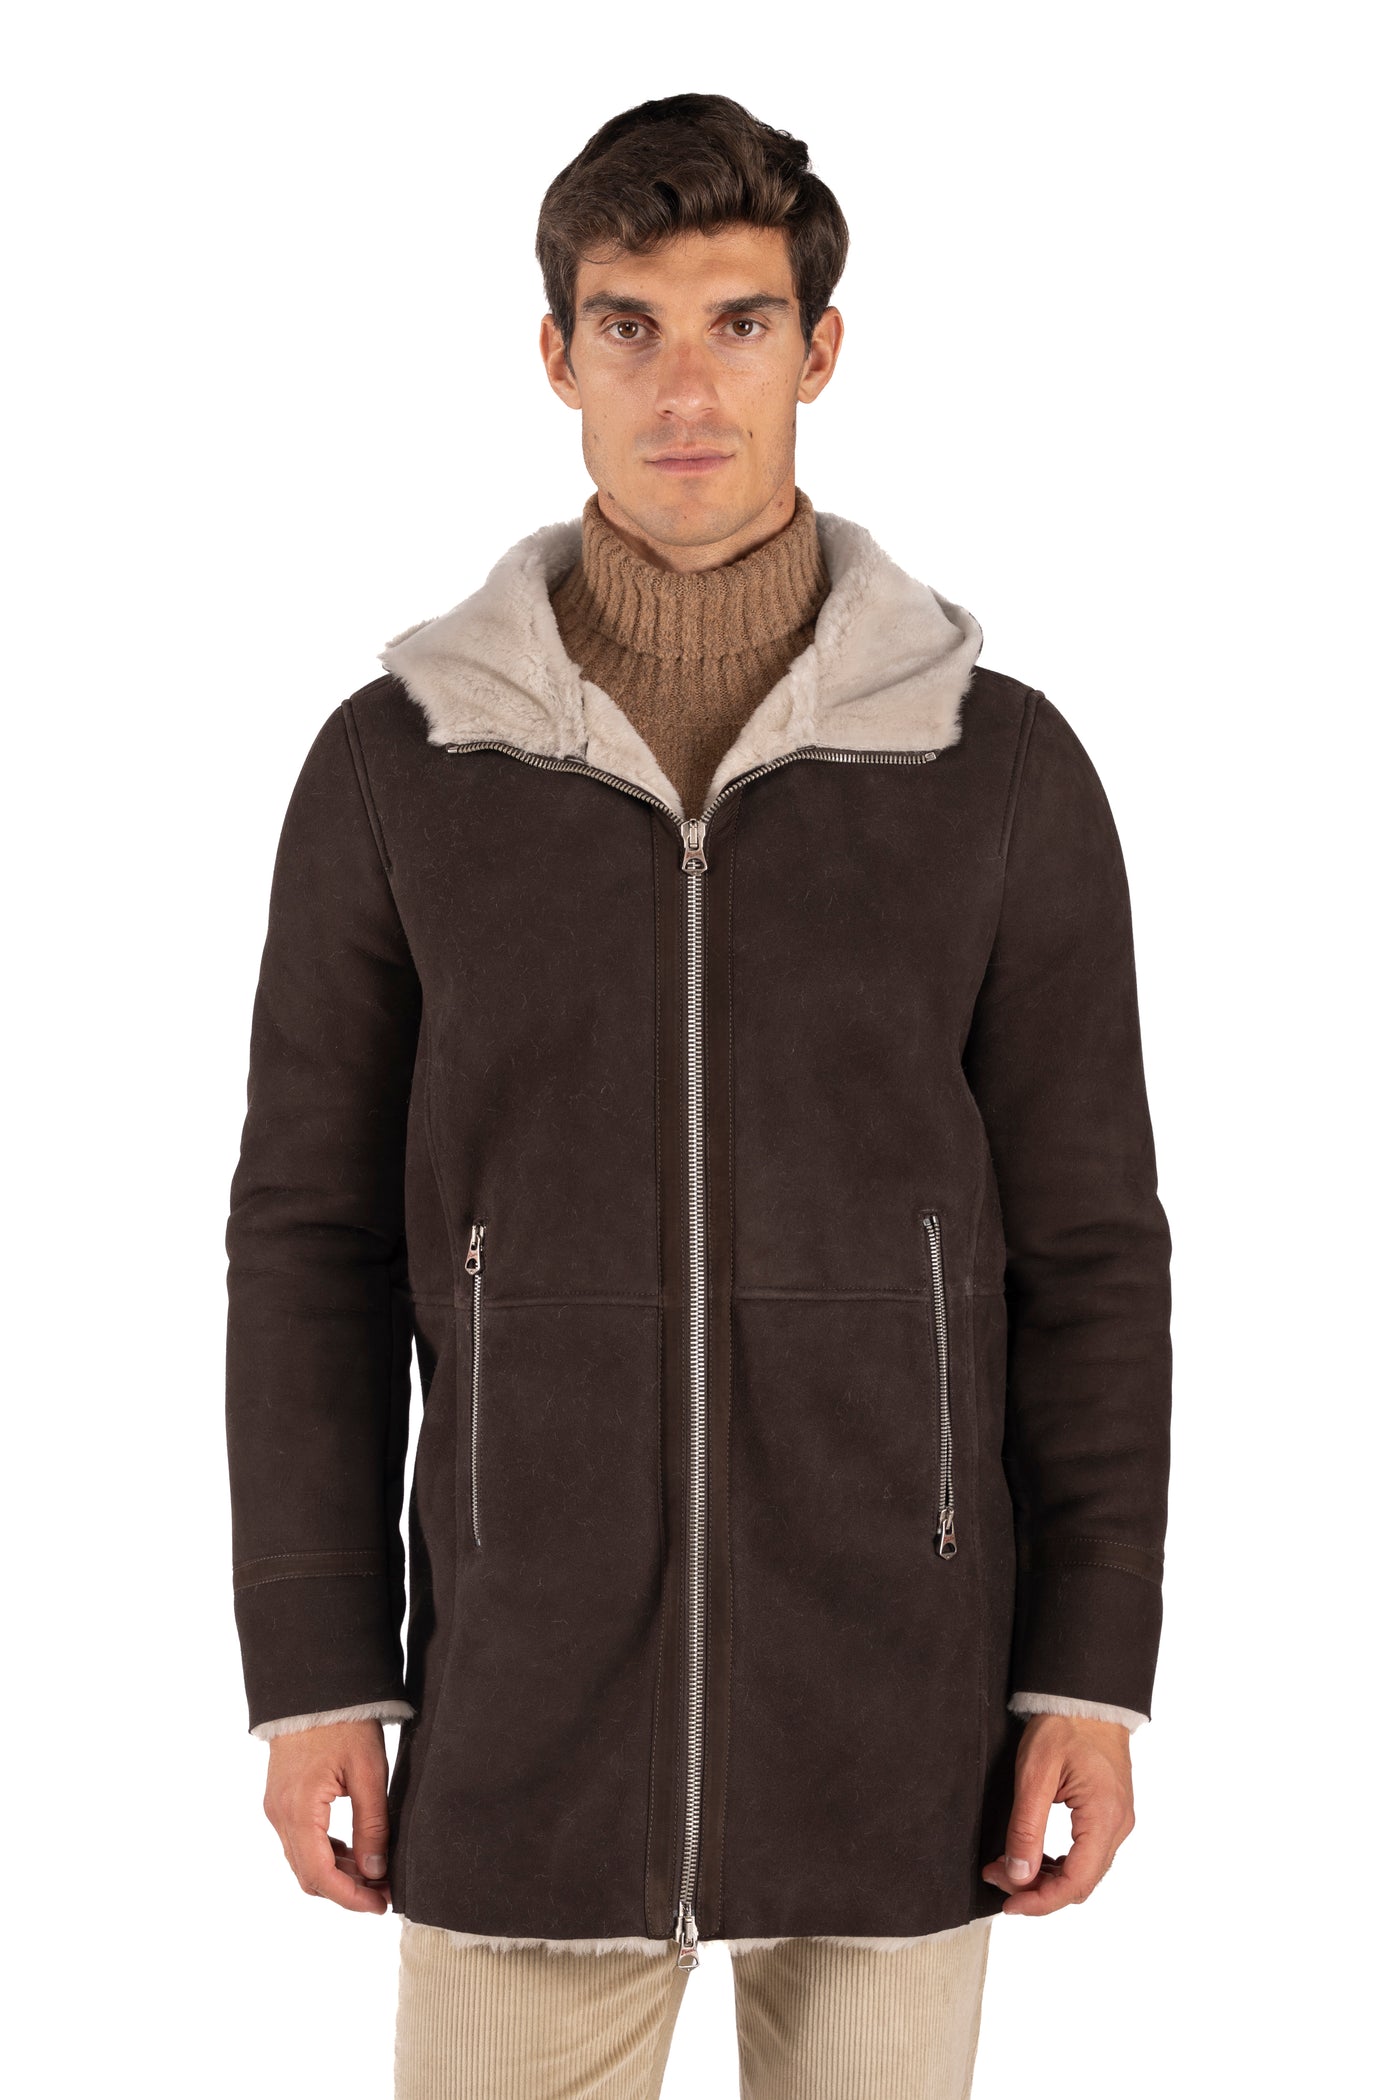 SHEARLING SUED